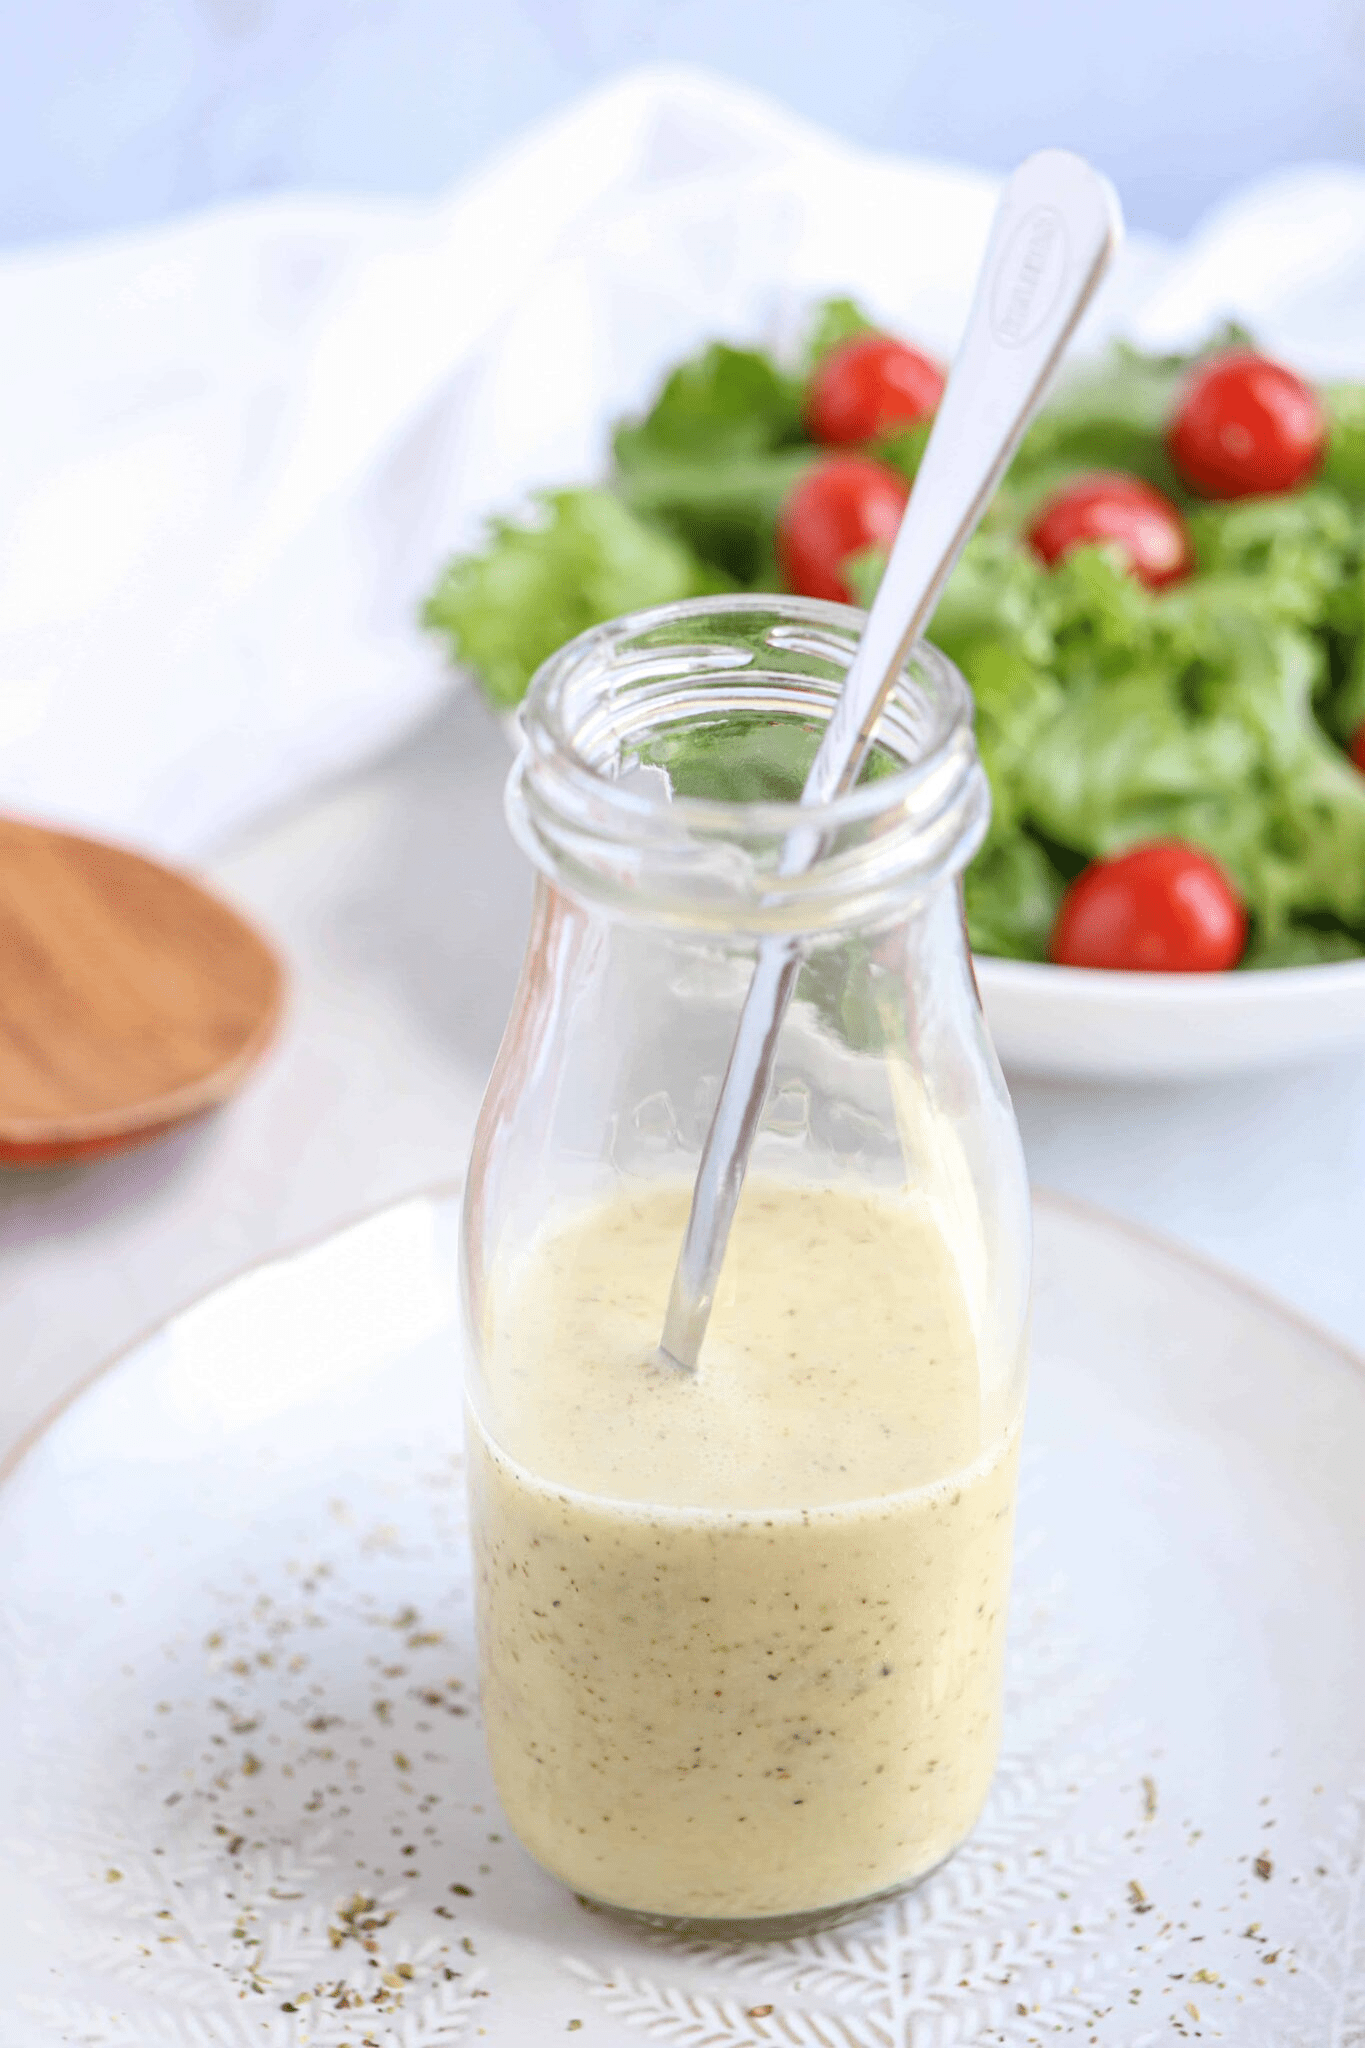 Greek salad dressing in a glass bottle with a spoon inside on a gray plate.